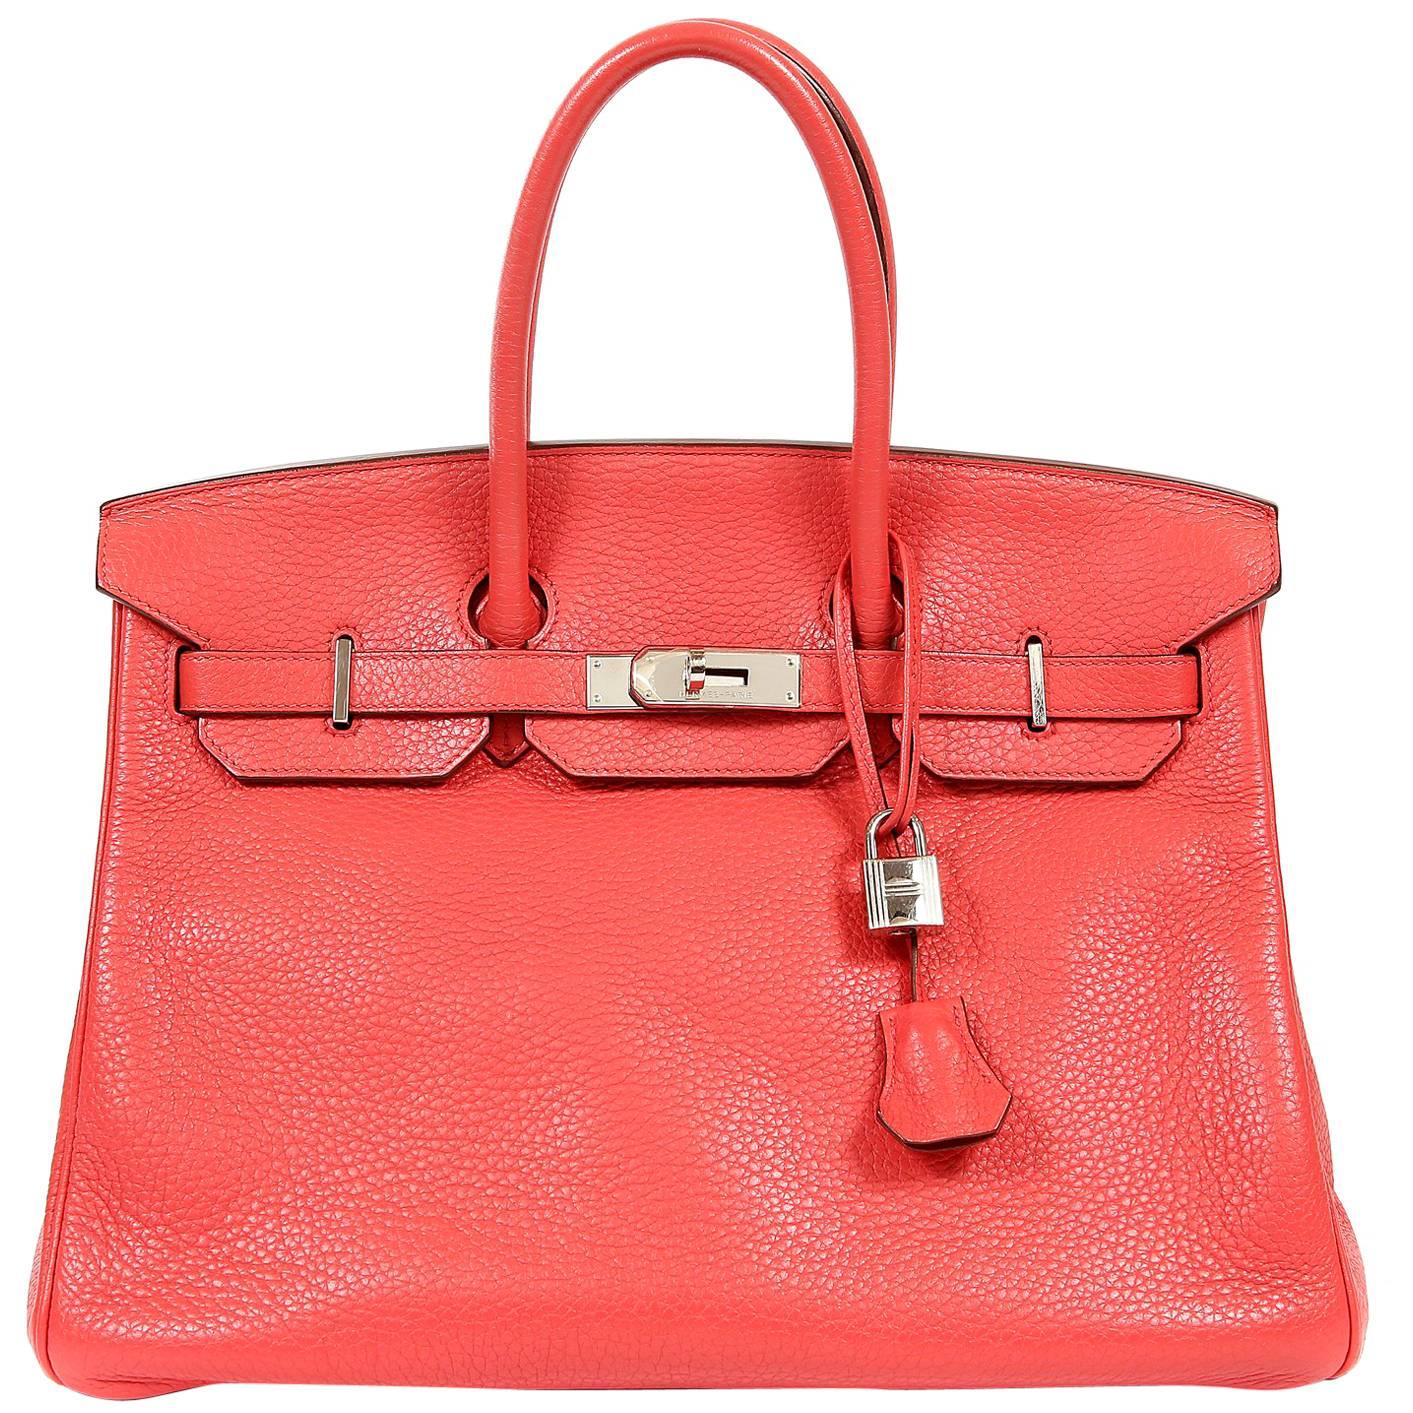 Hermes Bougainvillea Clemence 35 cm Birkin Bag with PHW For Sale